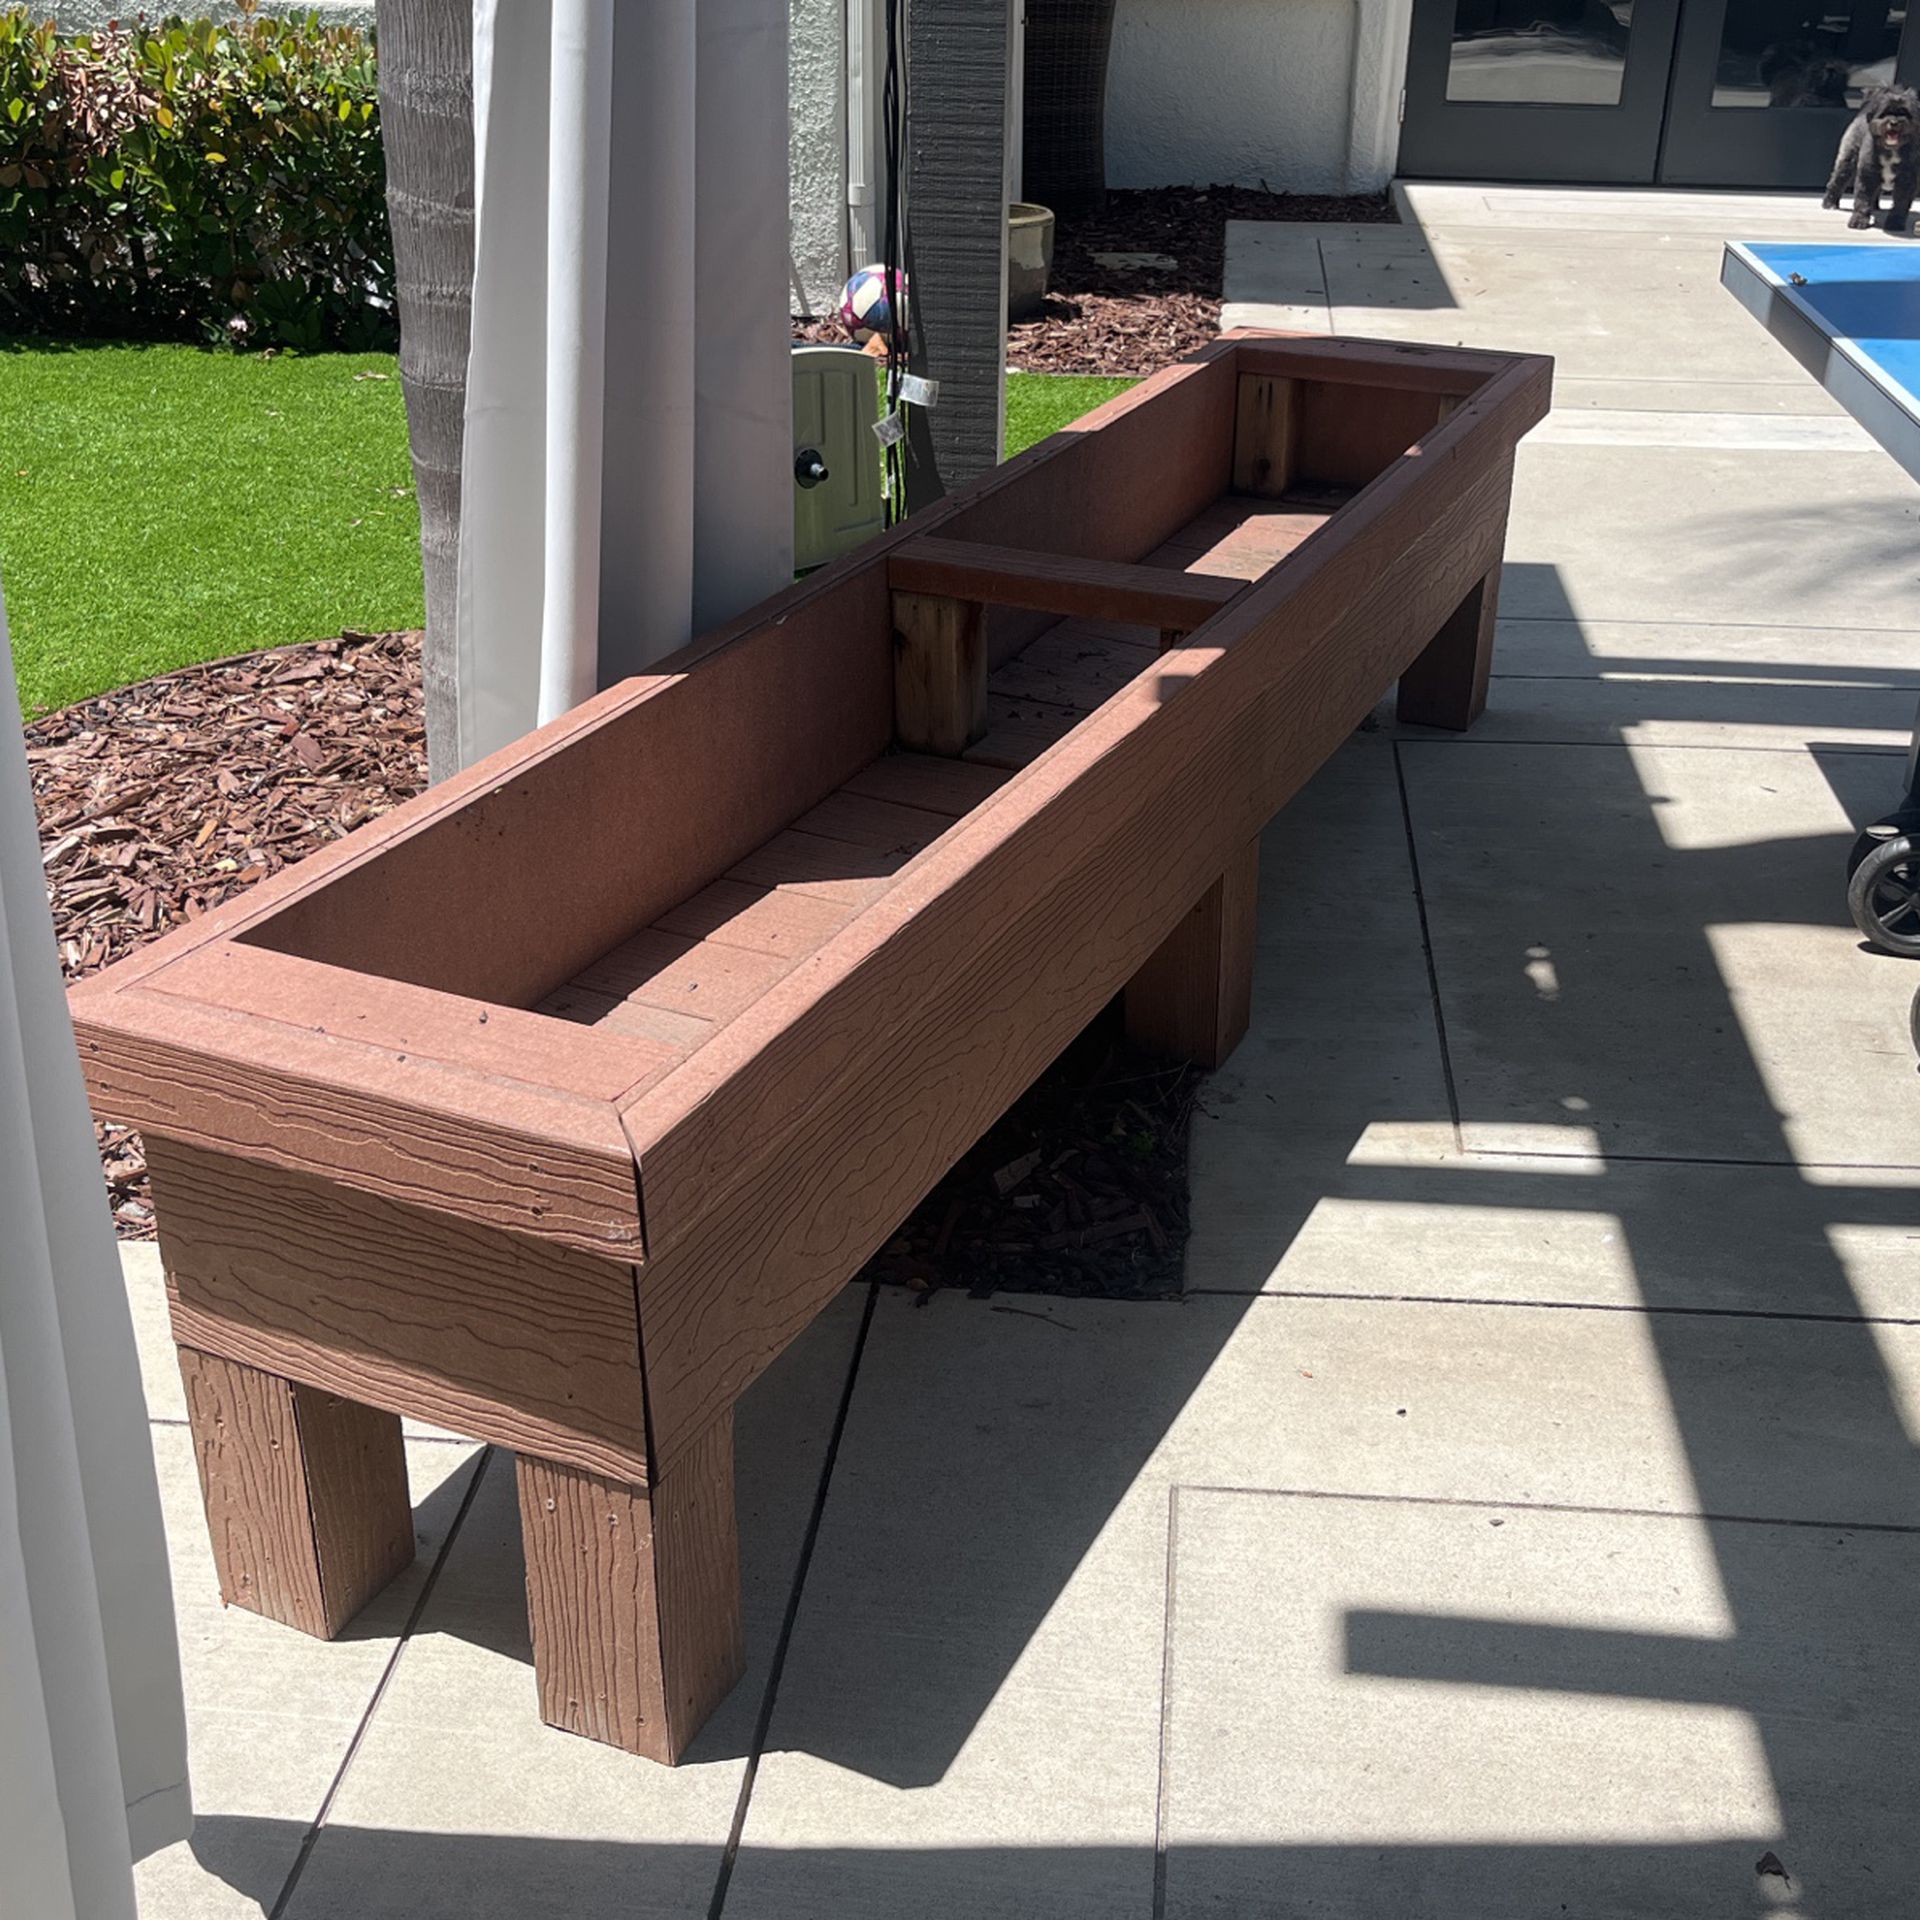 Heavy Duty Planter Box Made With Wood And Composite Decking material 